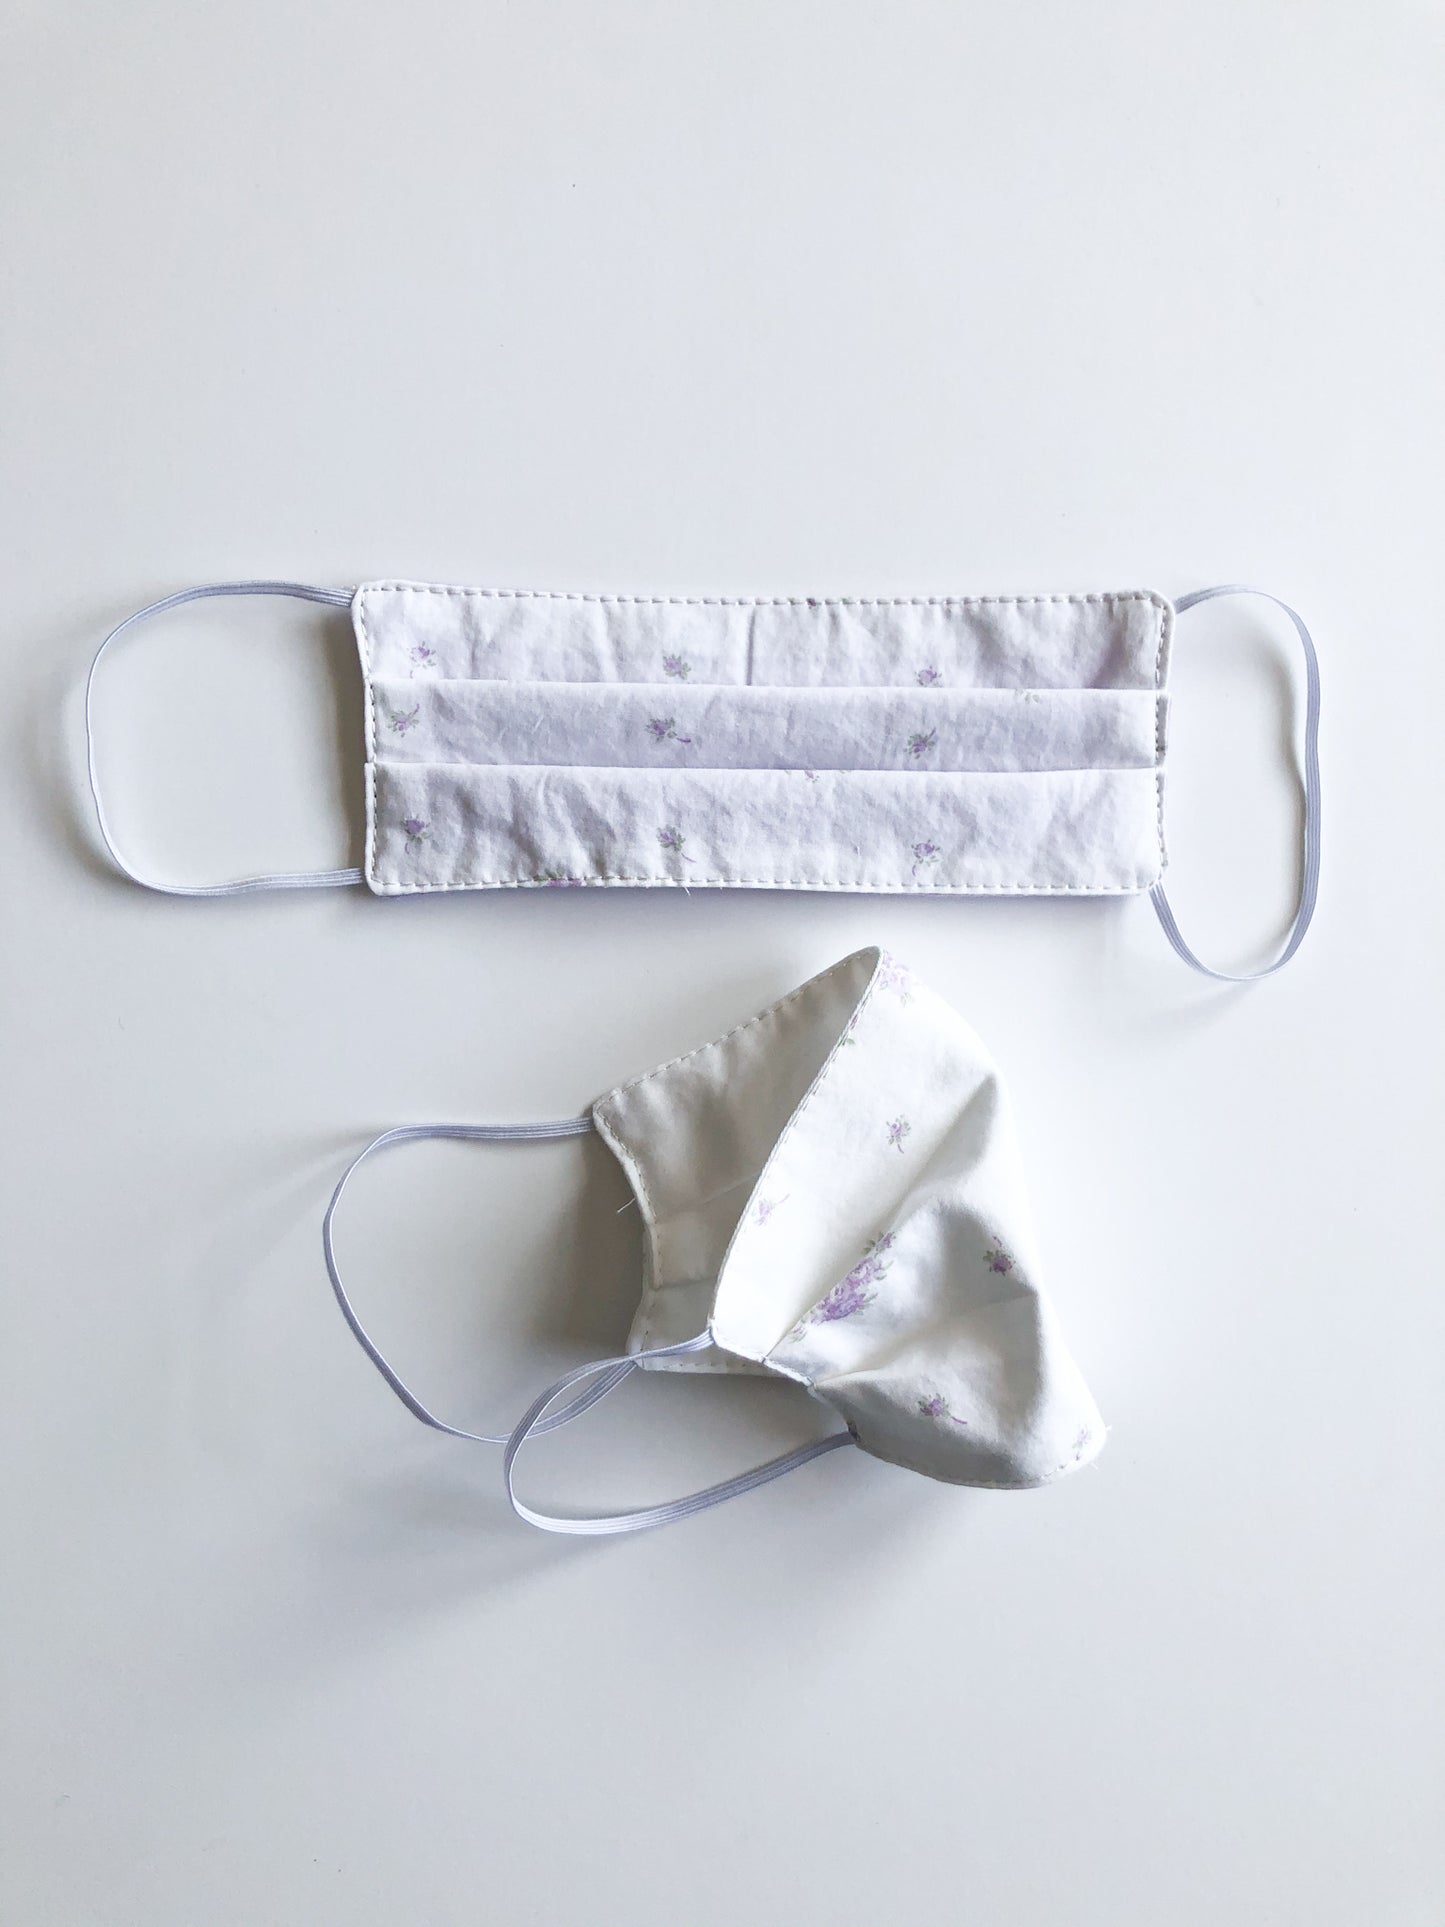 Upcycled Cotton Reversible Reusable Non-Medical Face Masks